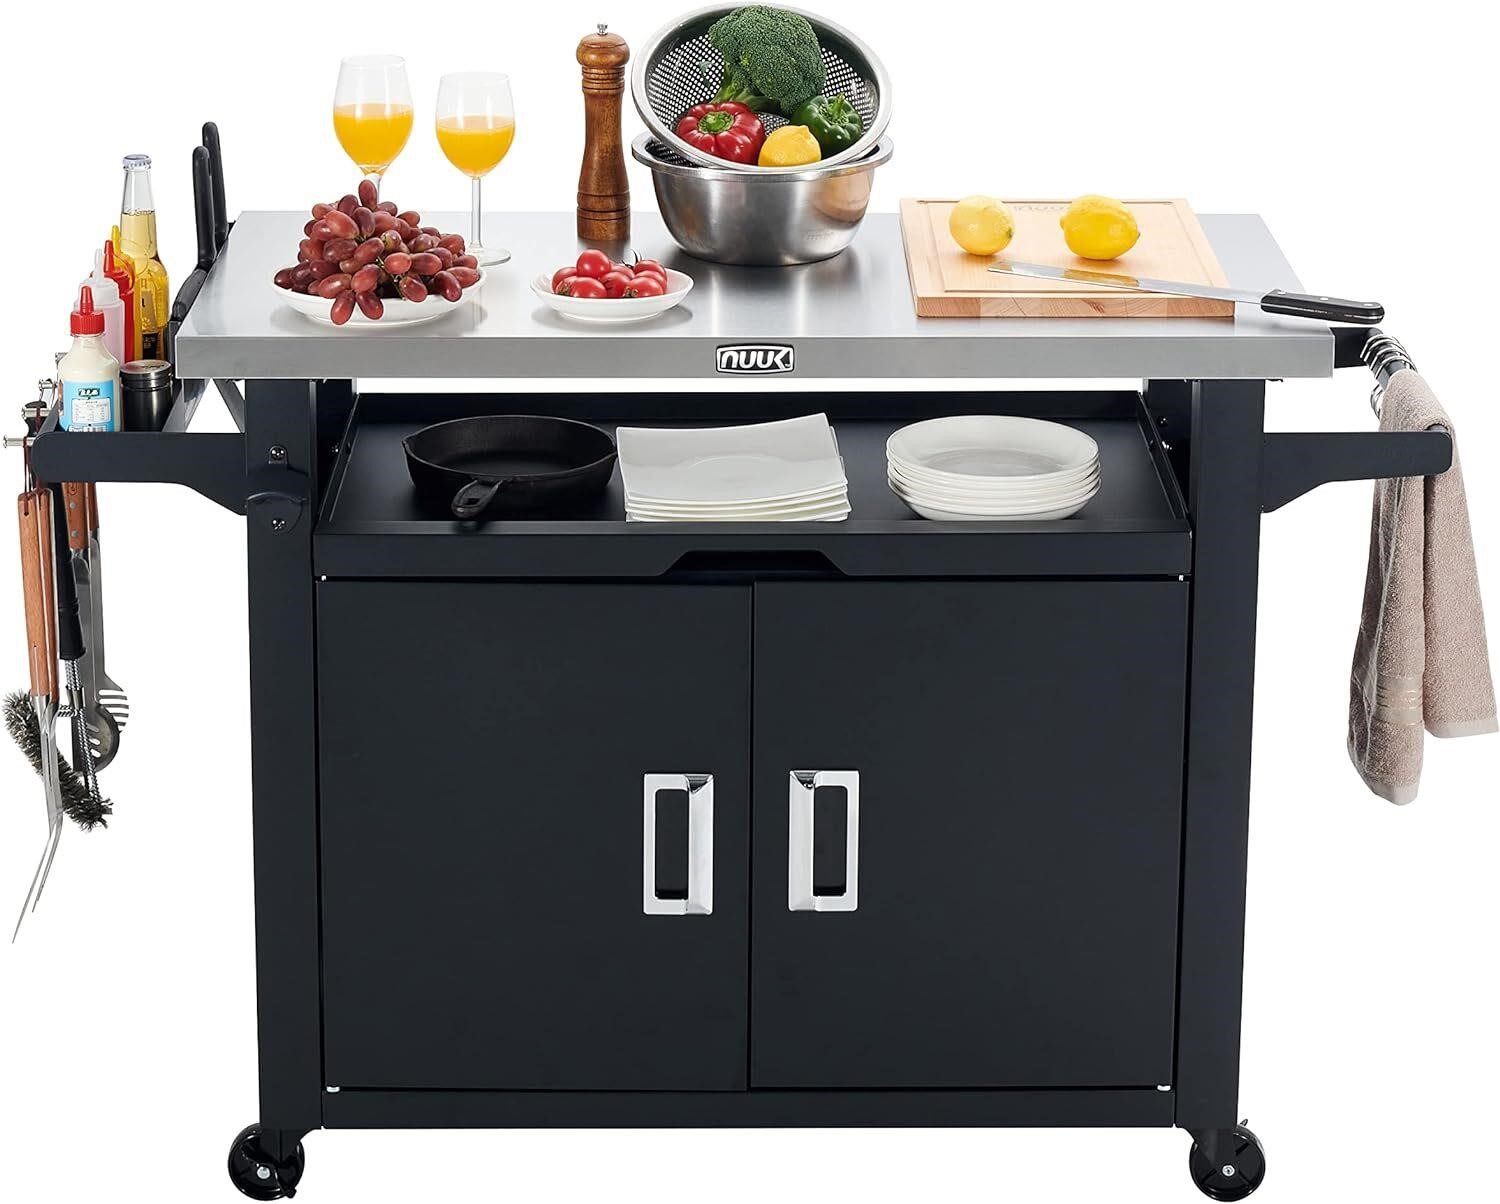 NUUK Pro 42-Inch Rolling Outdoor Kitchen Island